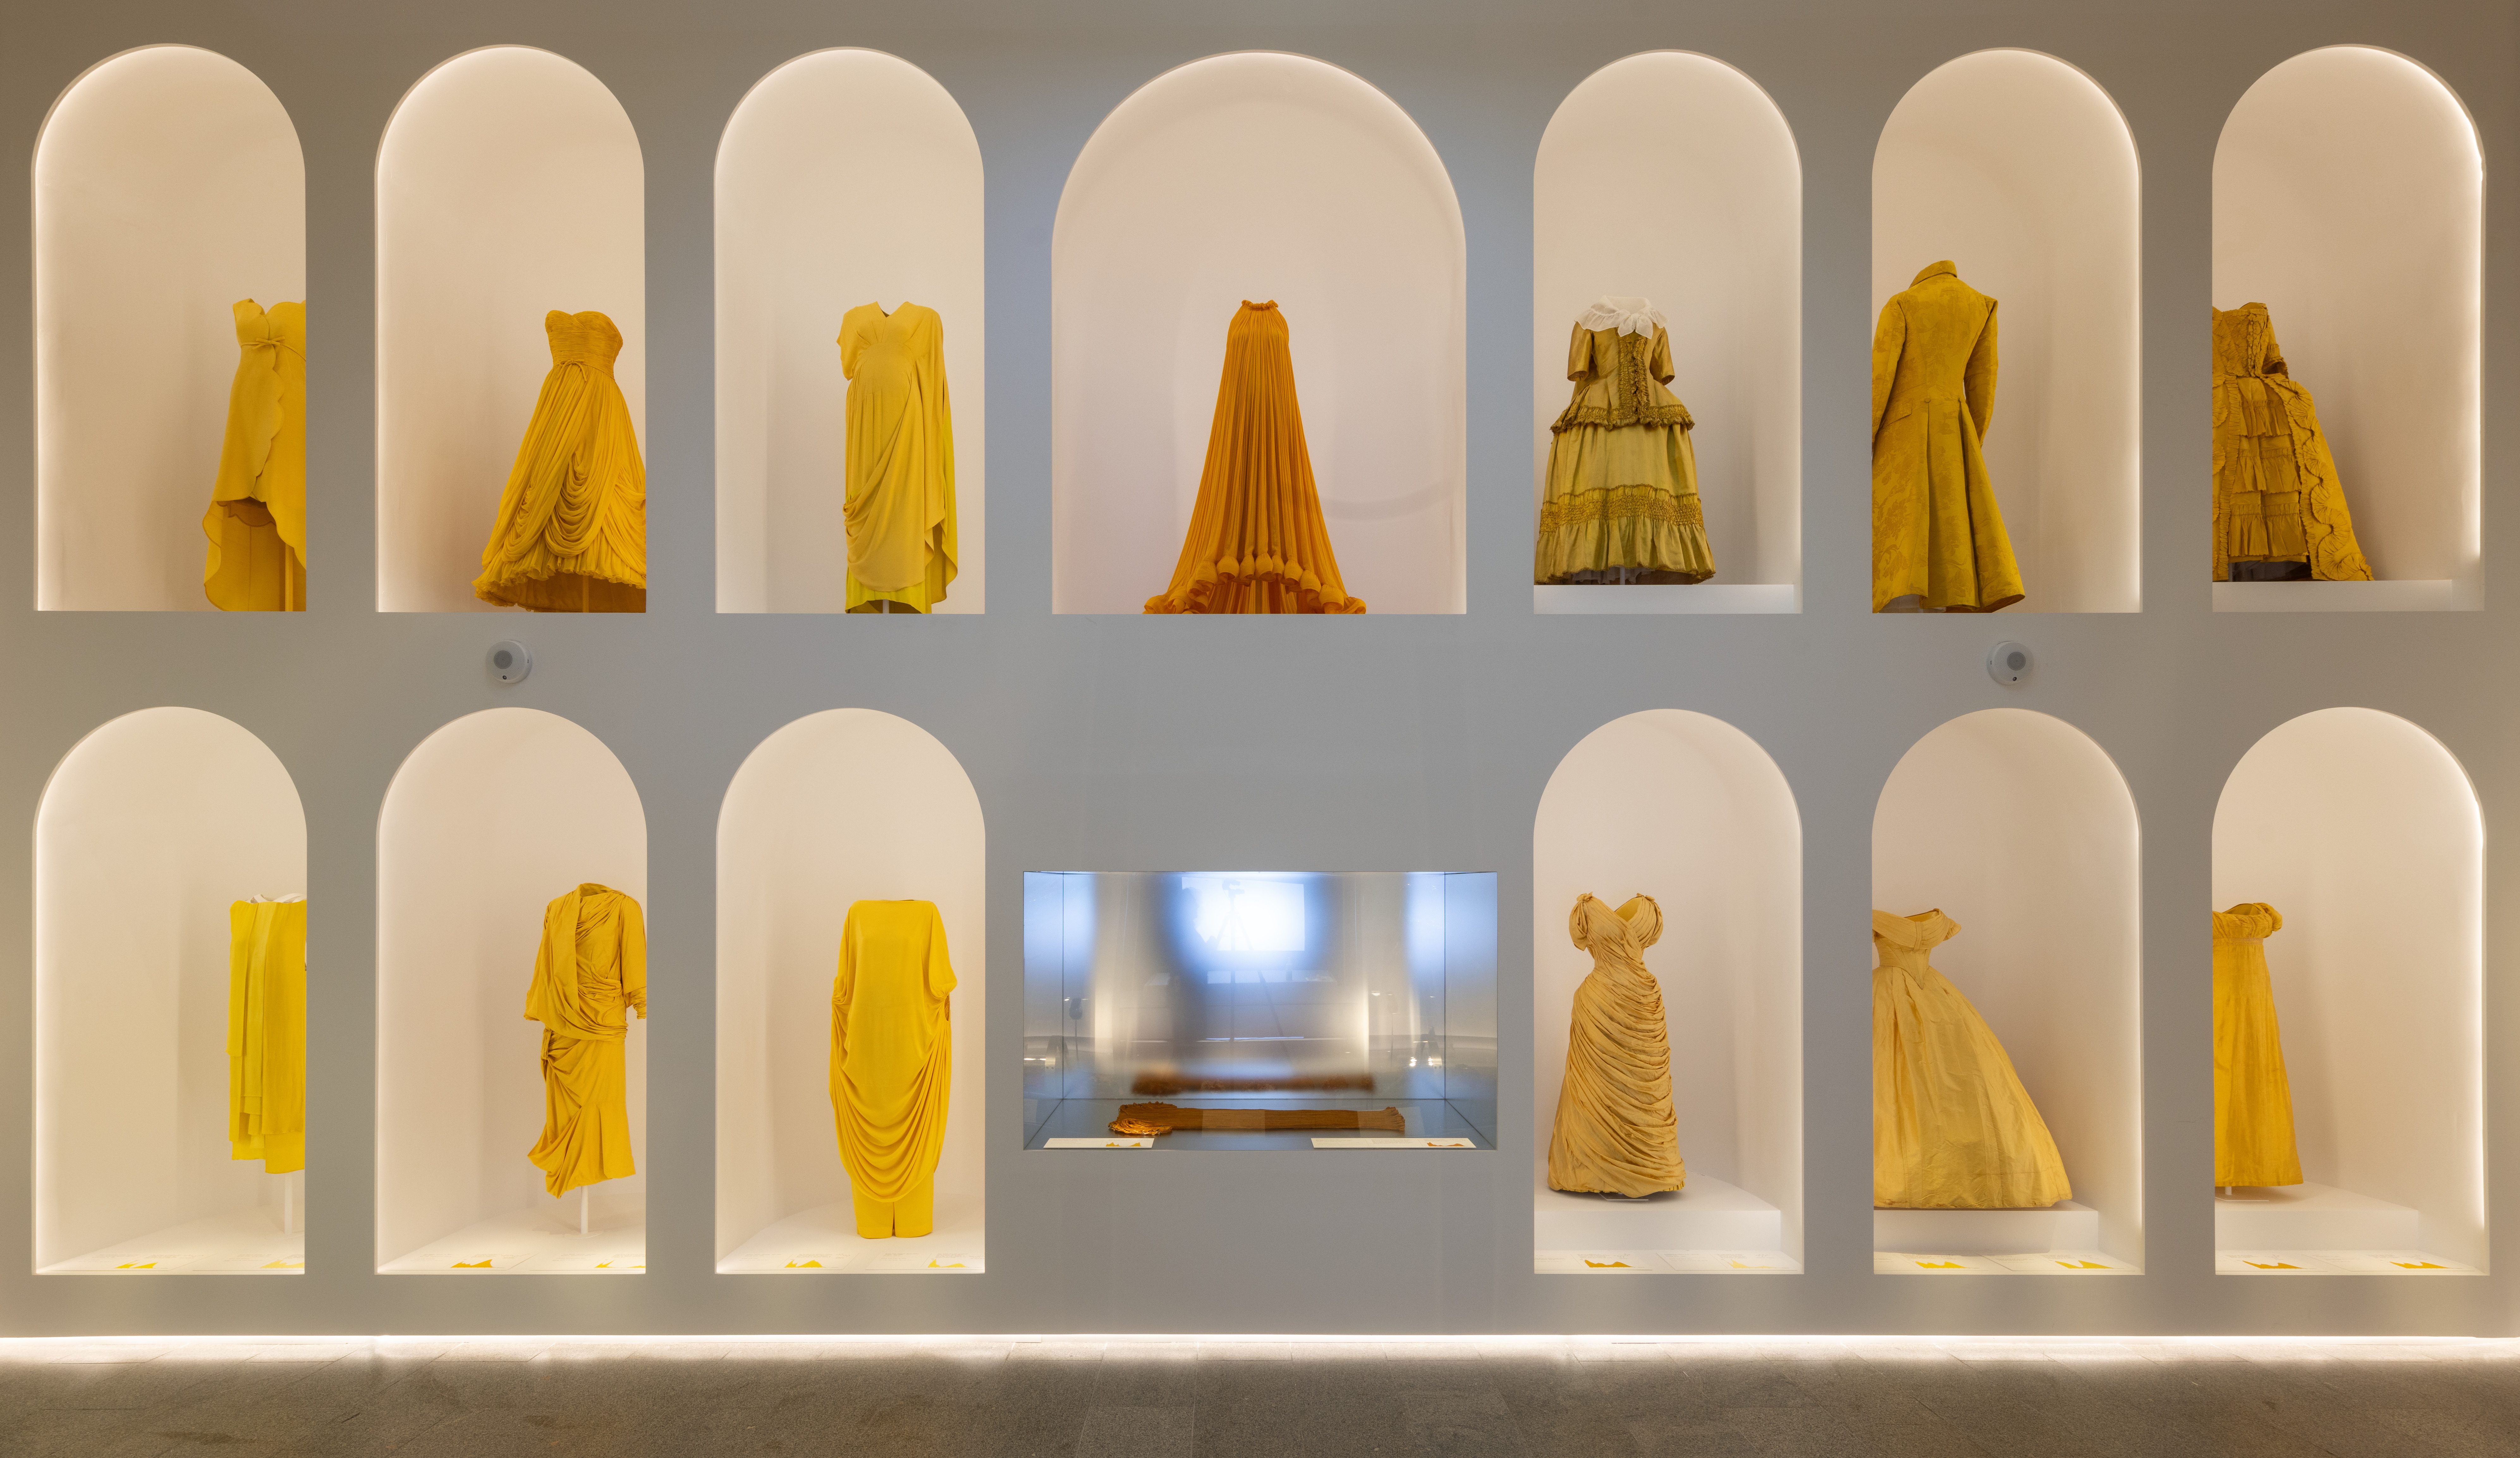 Gowns in shades of yellow and orange displayed in alcoves